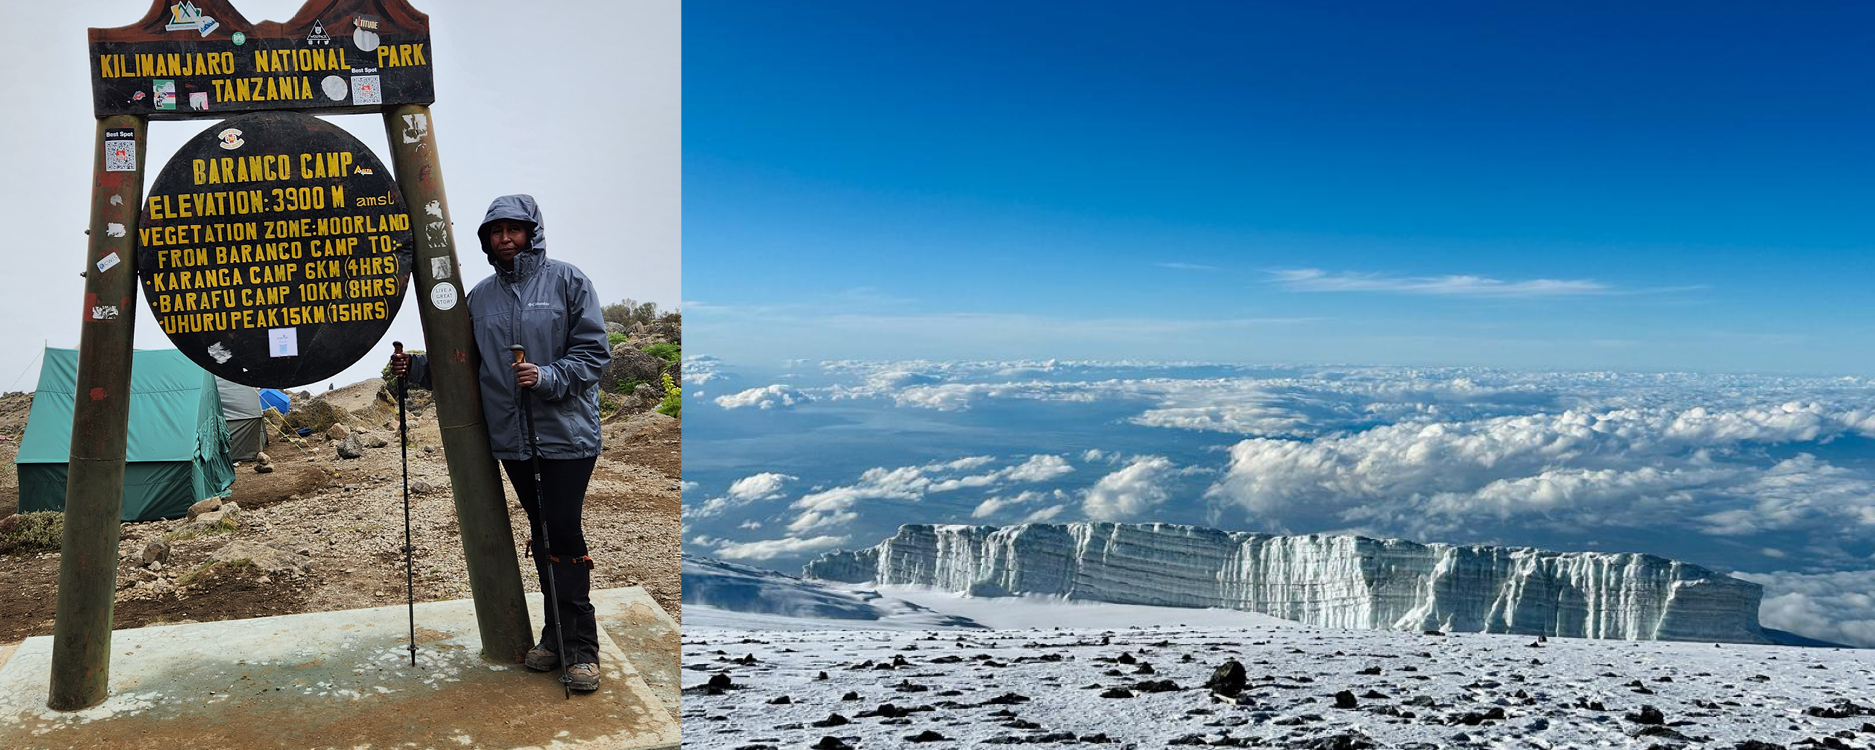 (left)photo of woman standing next to sign; (right) top of snowy mountain